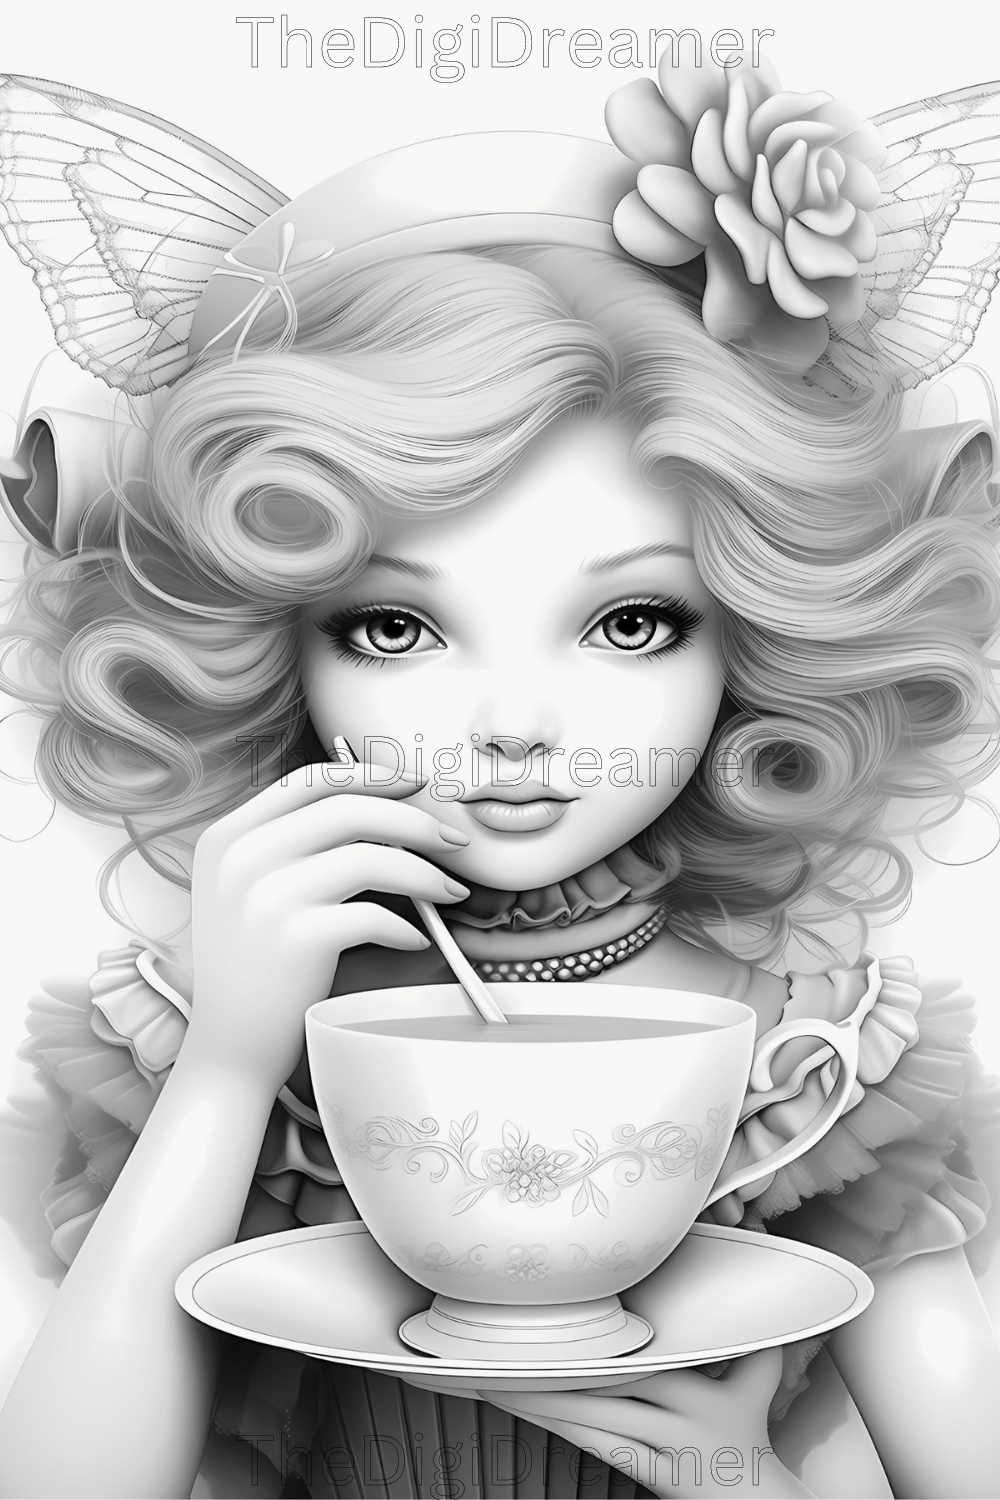 40 Tea Cup Fairies Set 1-Grayscale Printable Coloring Pages For Adults, Digital Download